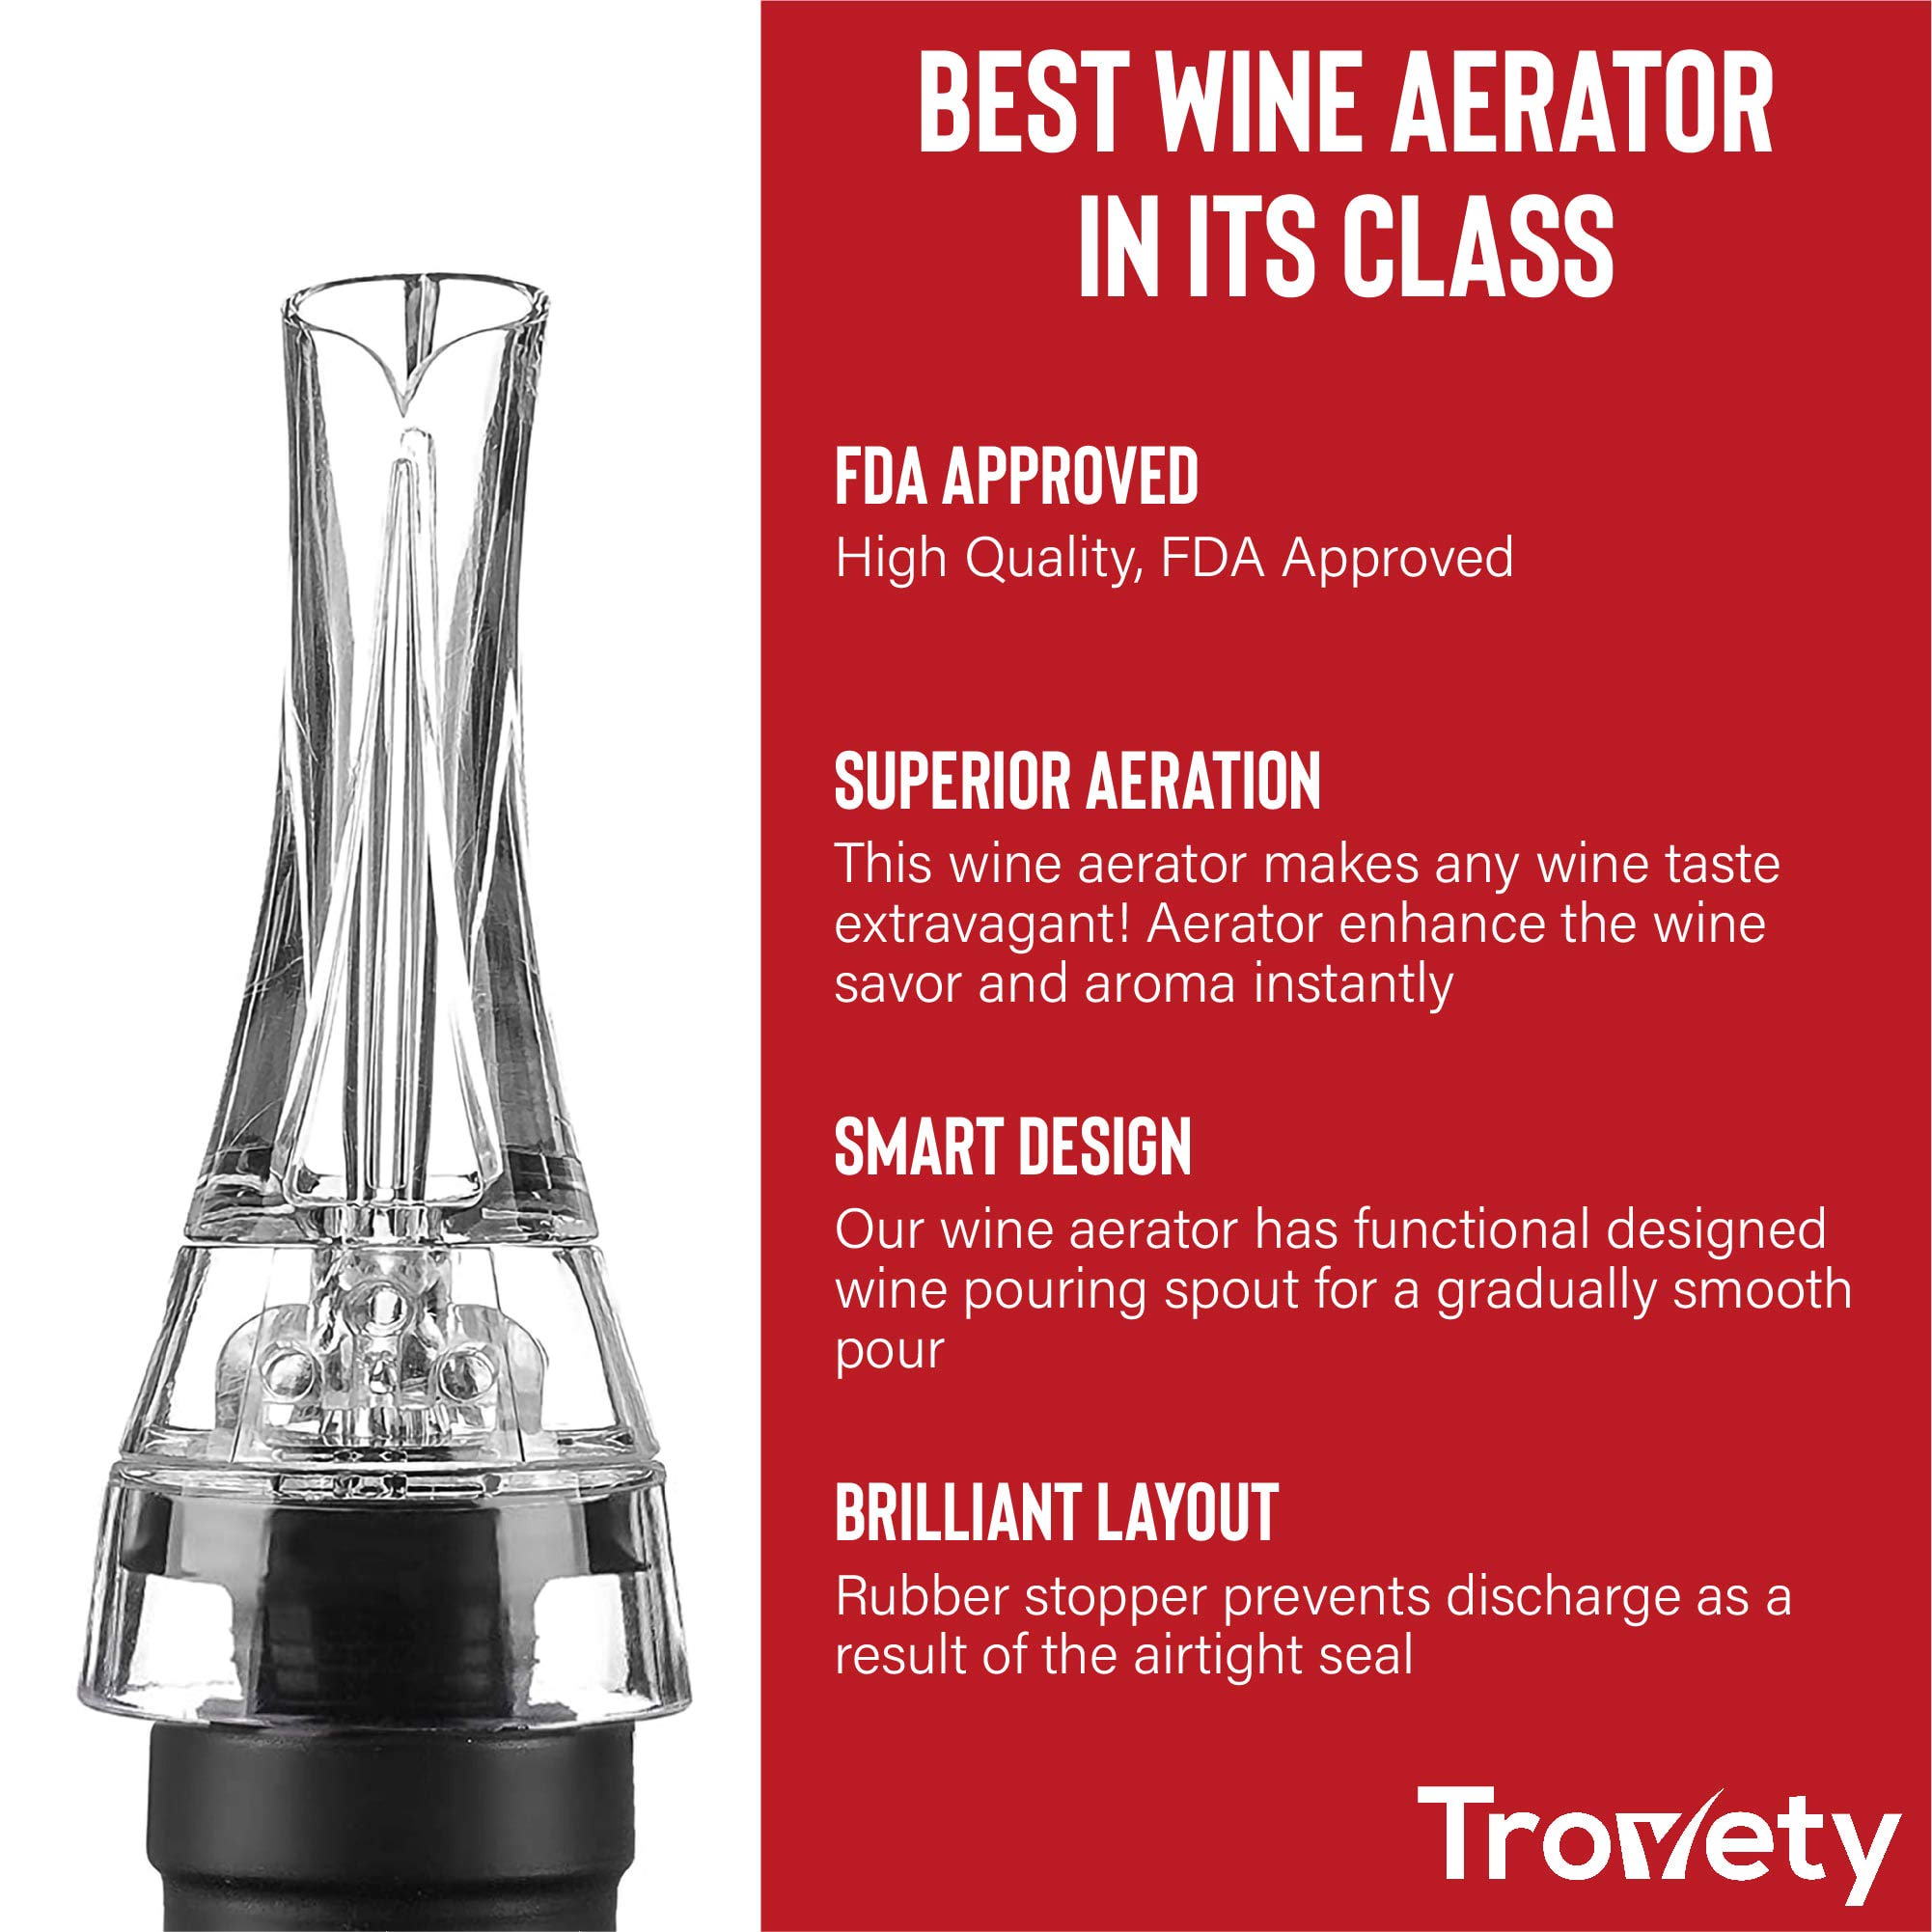 Trovety Aerators For Wine - Hawk-Bill Shape for Easy, No Drip Wine Aerator Pourer - Unique Built-In Aerator System for Fast Decanting - Can Fit Most Bottle Spout Sizes